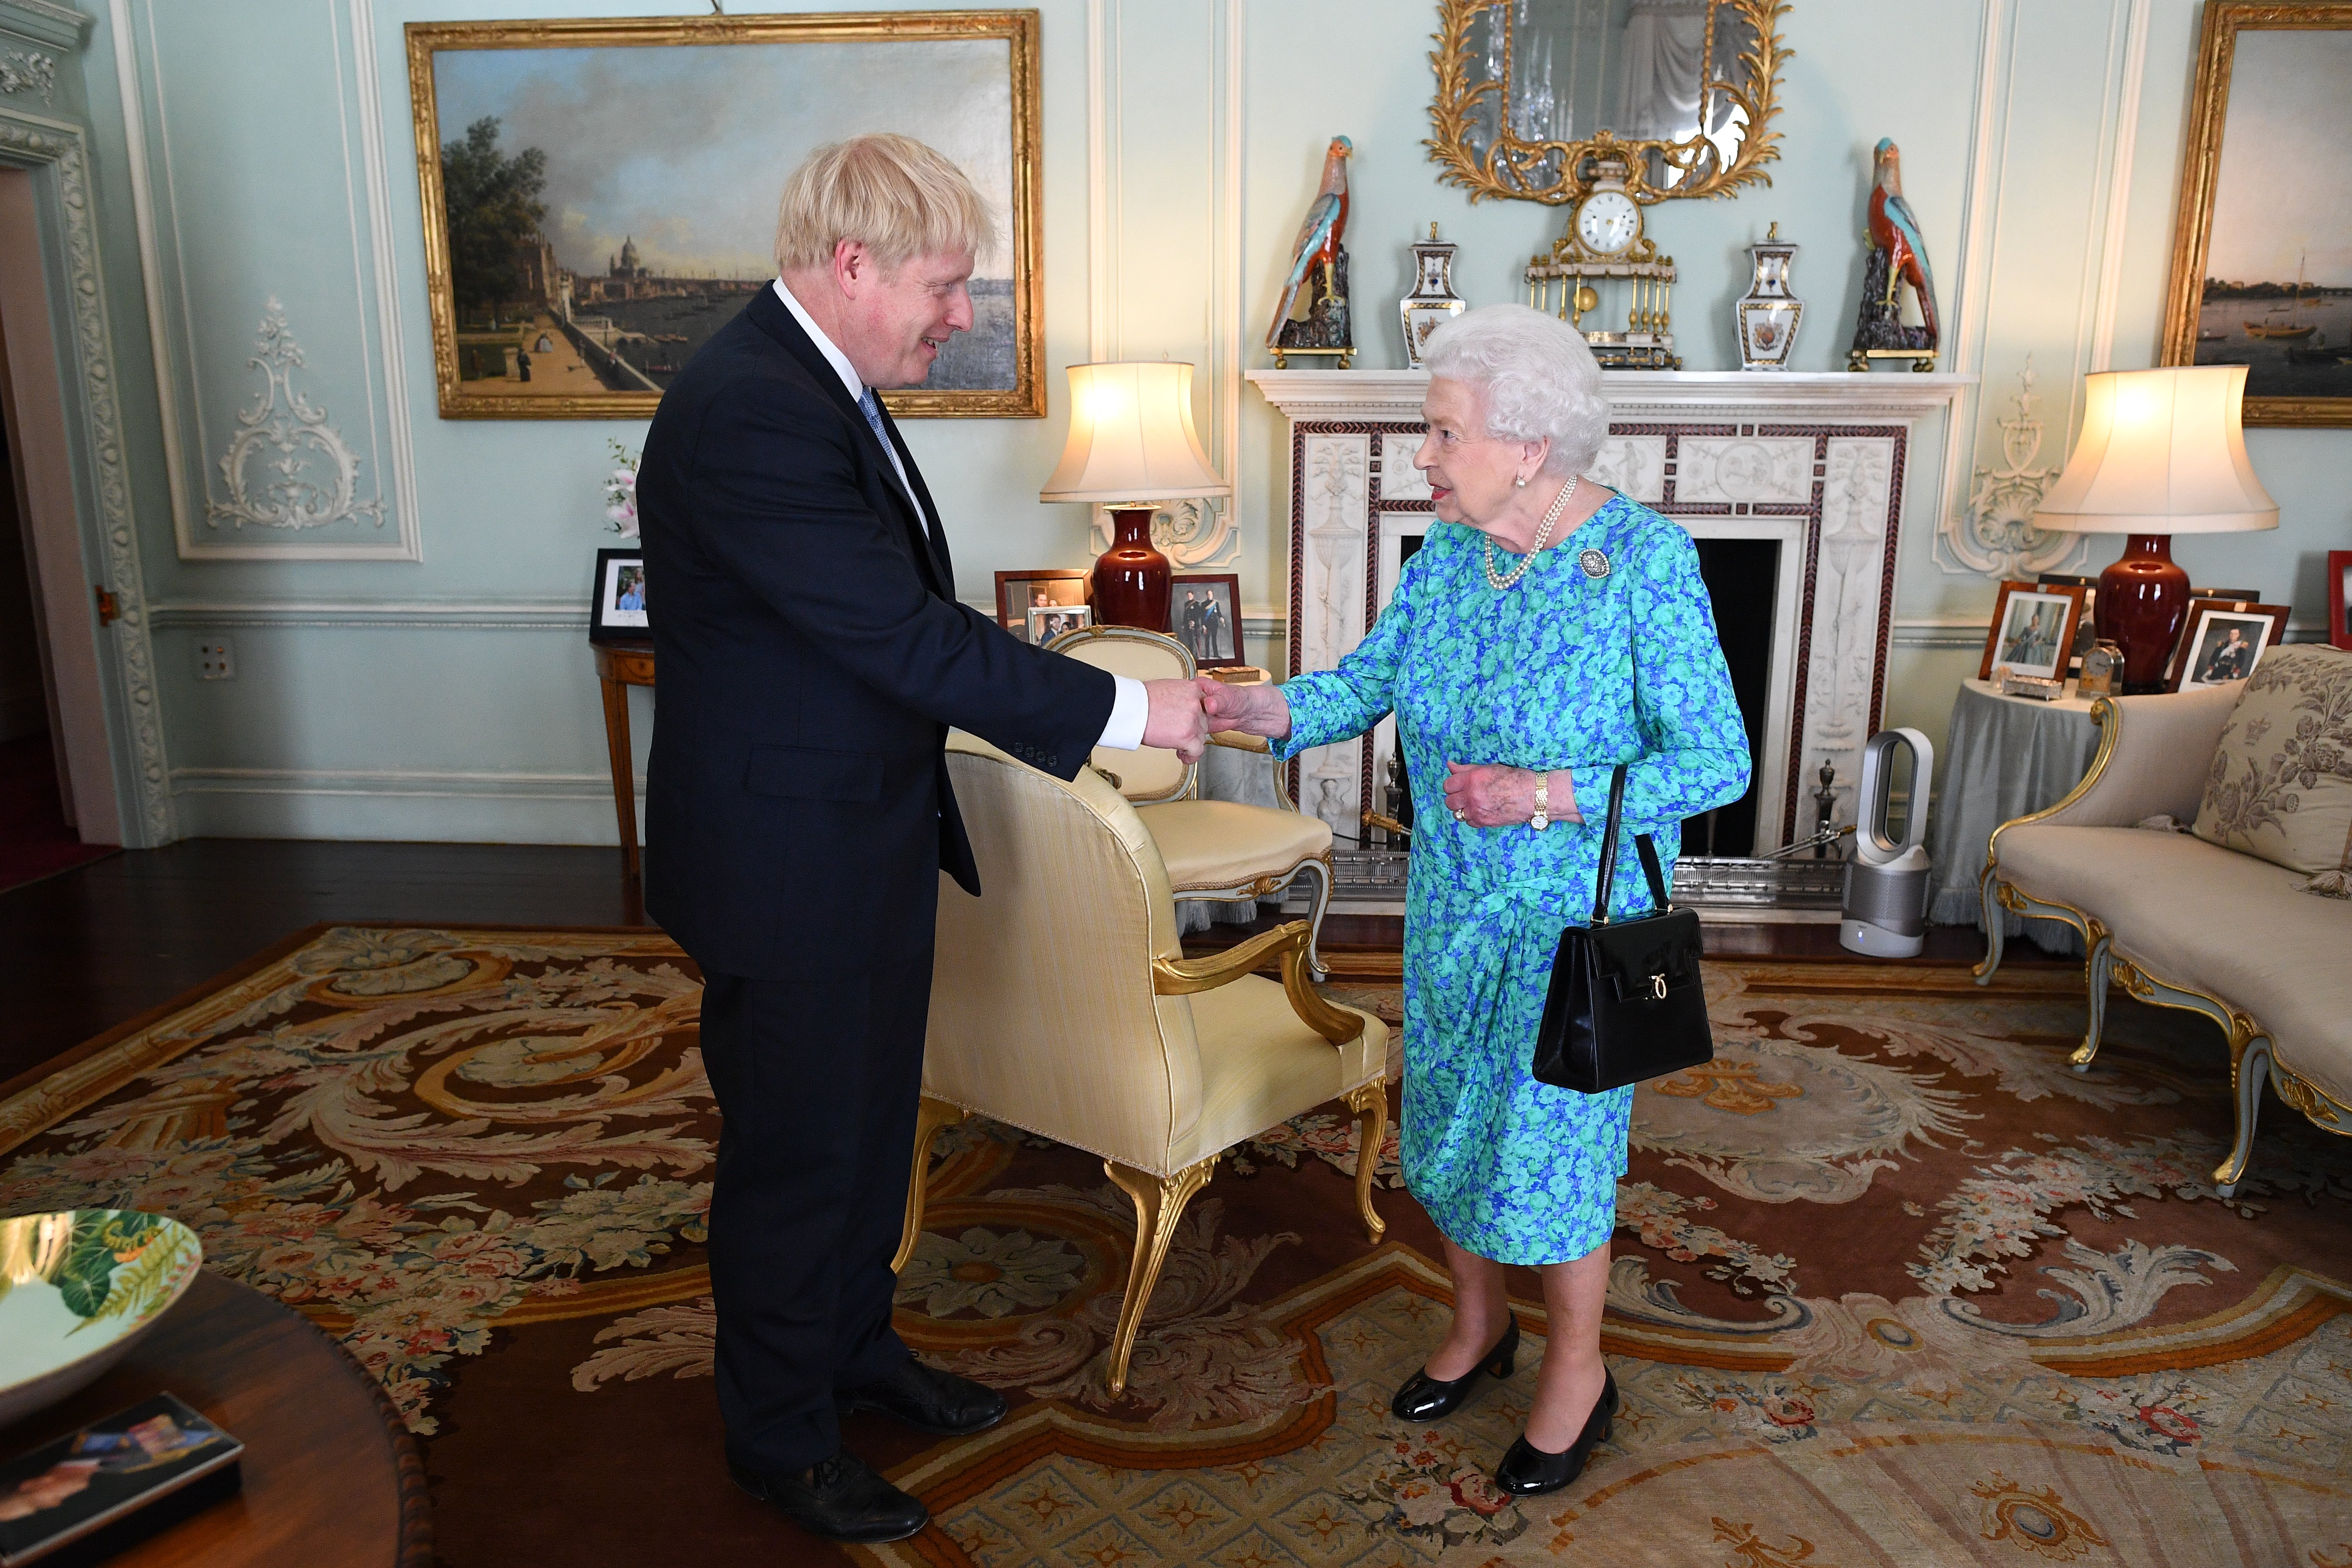 Boris Johnson and Queen Elizabeth in London 2019. | Source: Getty Images